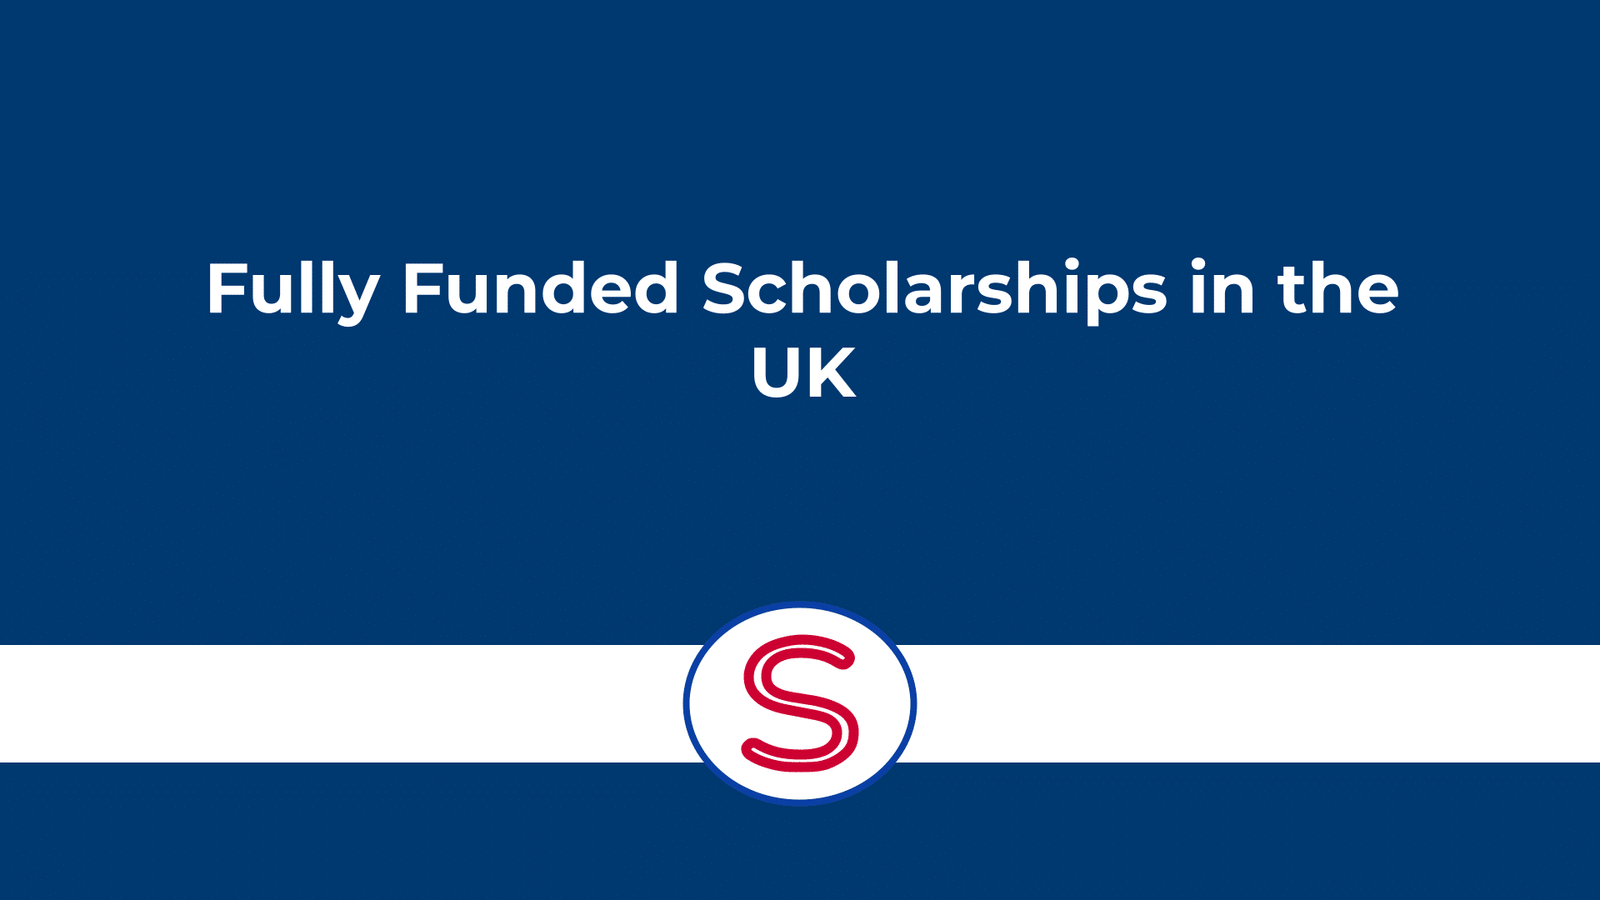 The top 7 Fully Funded Scholarships in the UK